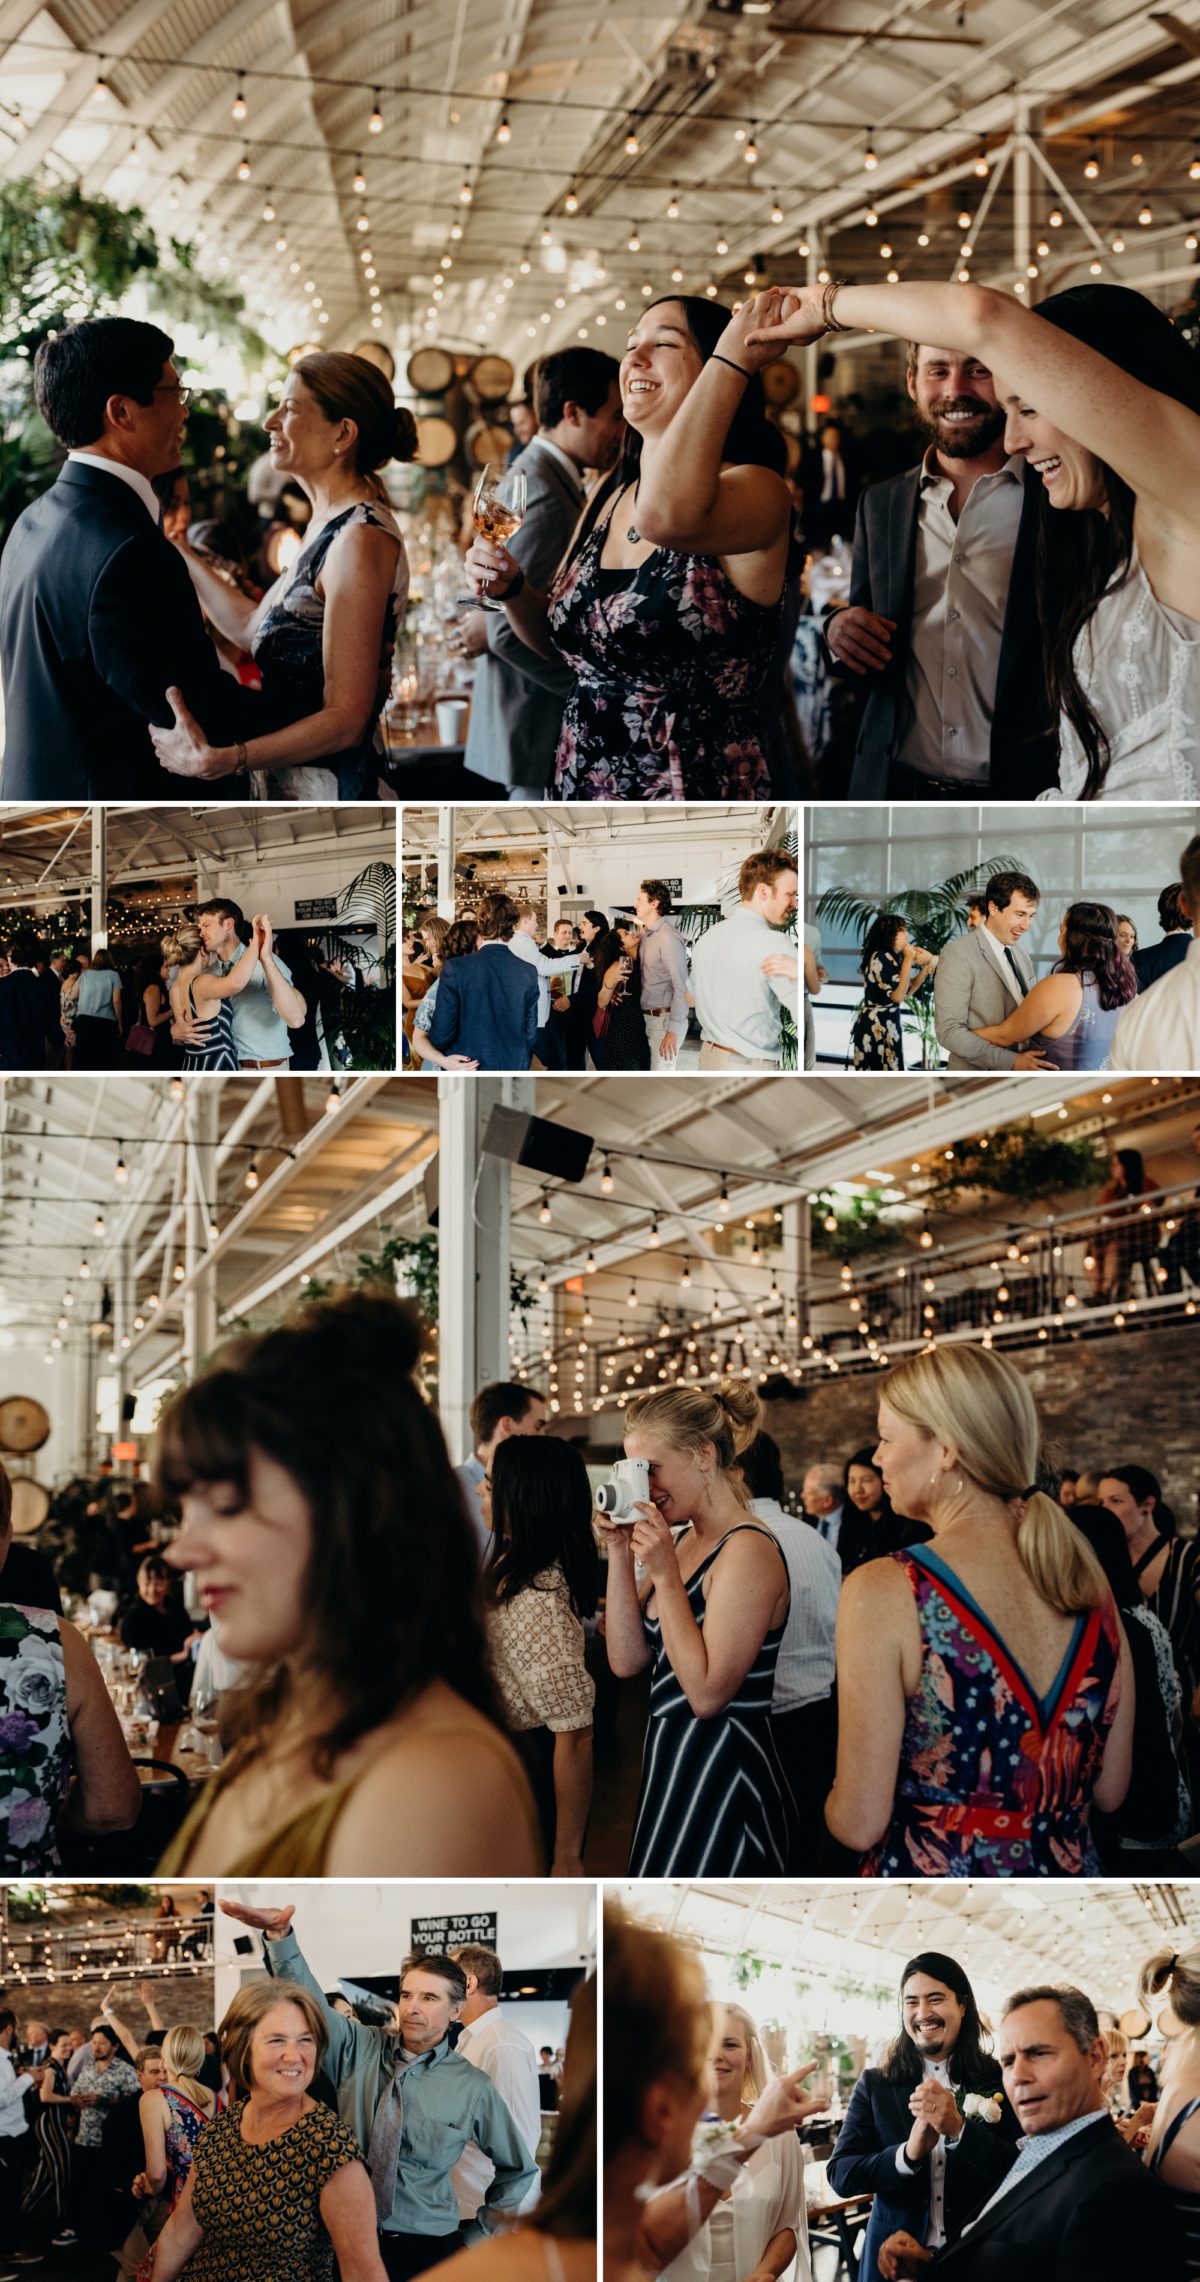 Dancing with DJ Aquaman at this Coopers Hall wedding in Portland, Oregon. Photographs by Briana Morrison Photography